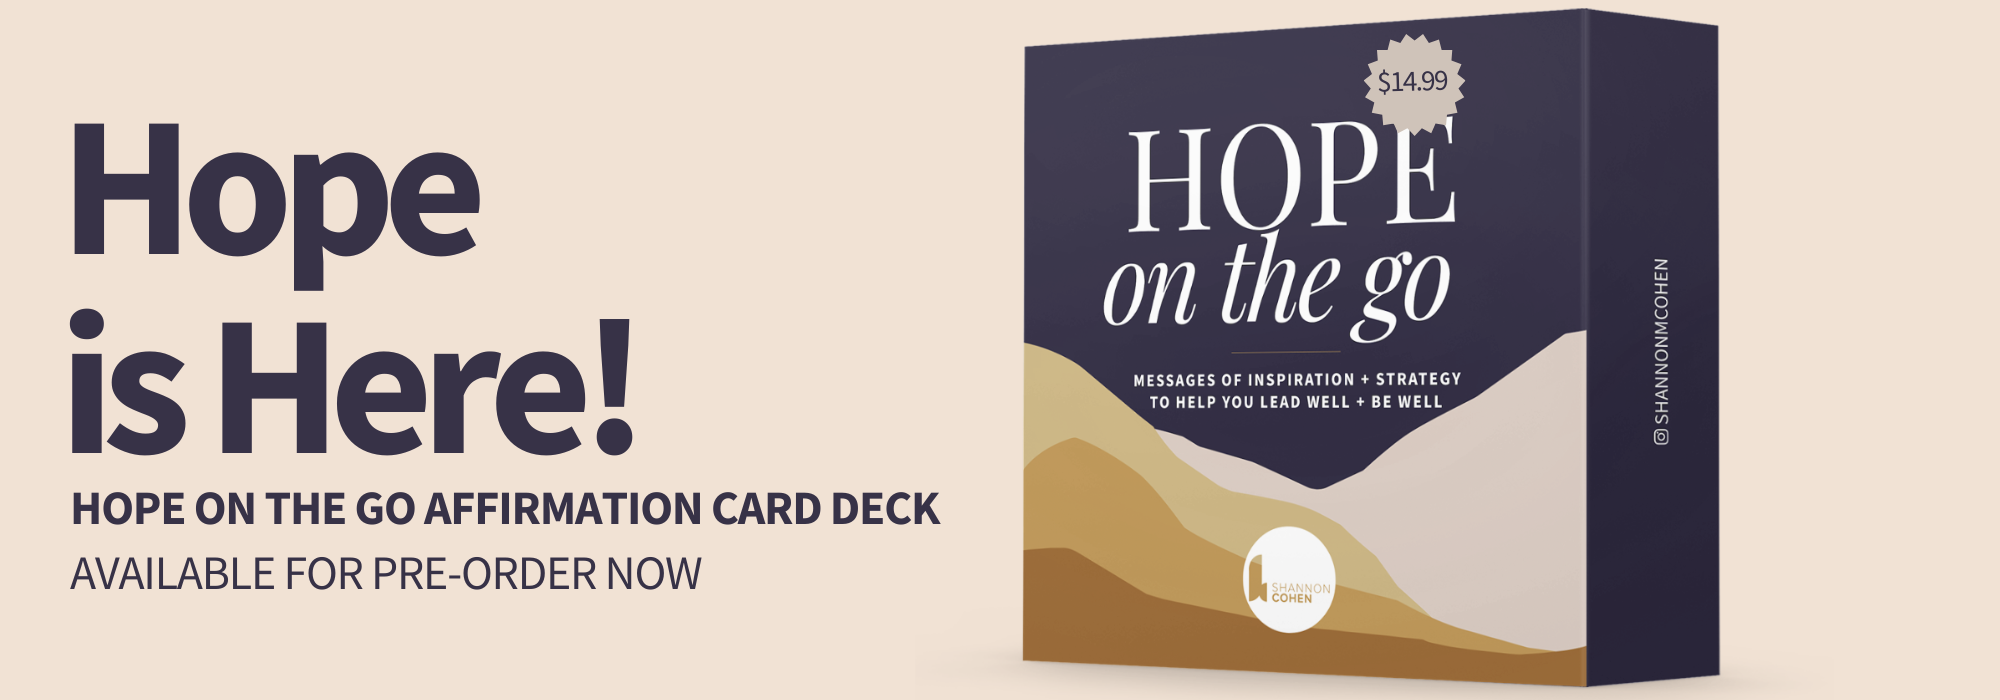 Hope on the Go Inspiration Card Deck